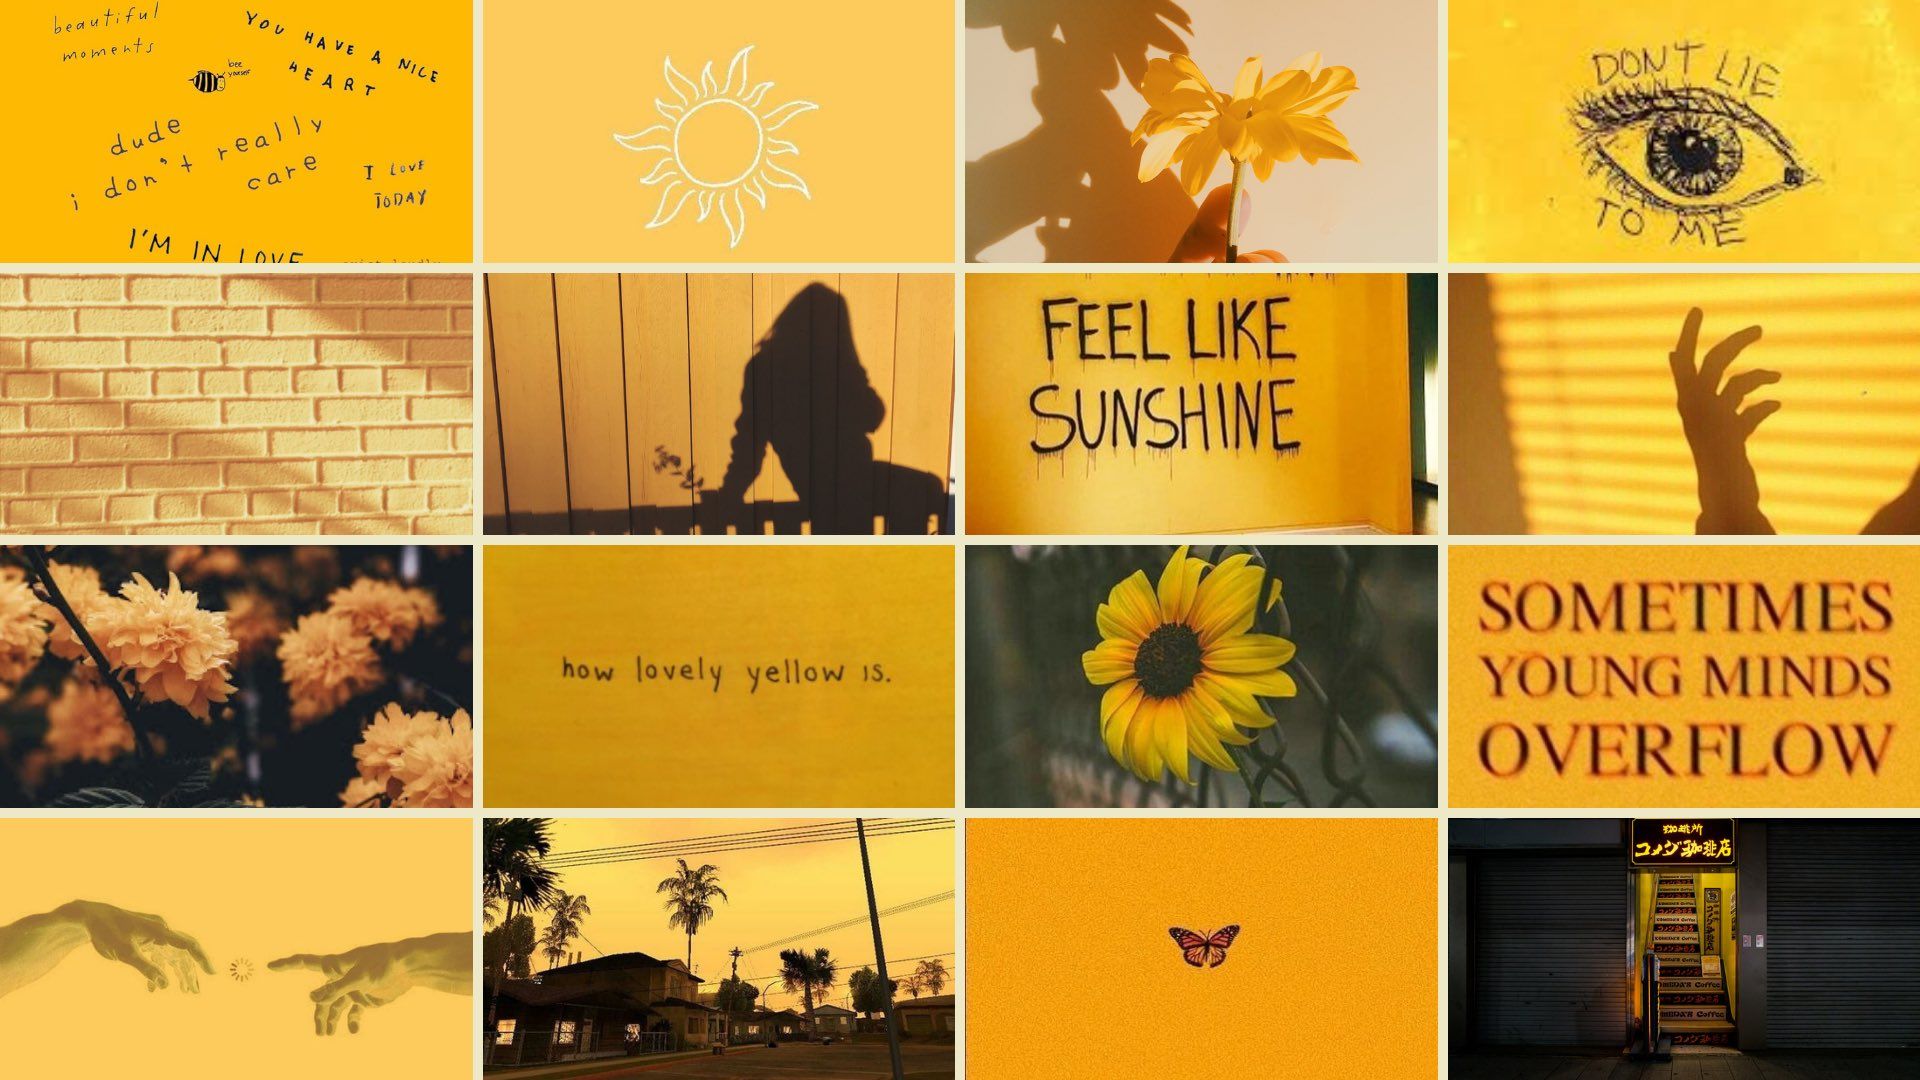 S U G K Y ᴮᴱ yellow collage wallpaper that I made for my laptop bg. Go ahead and use it! #desktopbackground #wallpaper #yellow # yellowaesthetic #sunfloweraesthetic #yellowcollage #collage #edit #